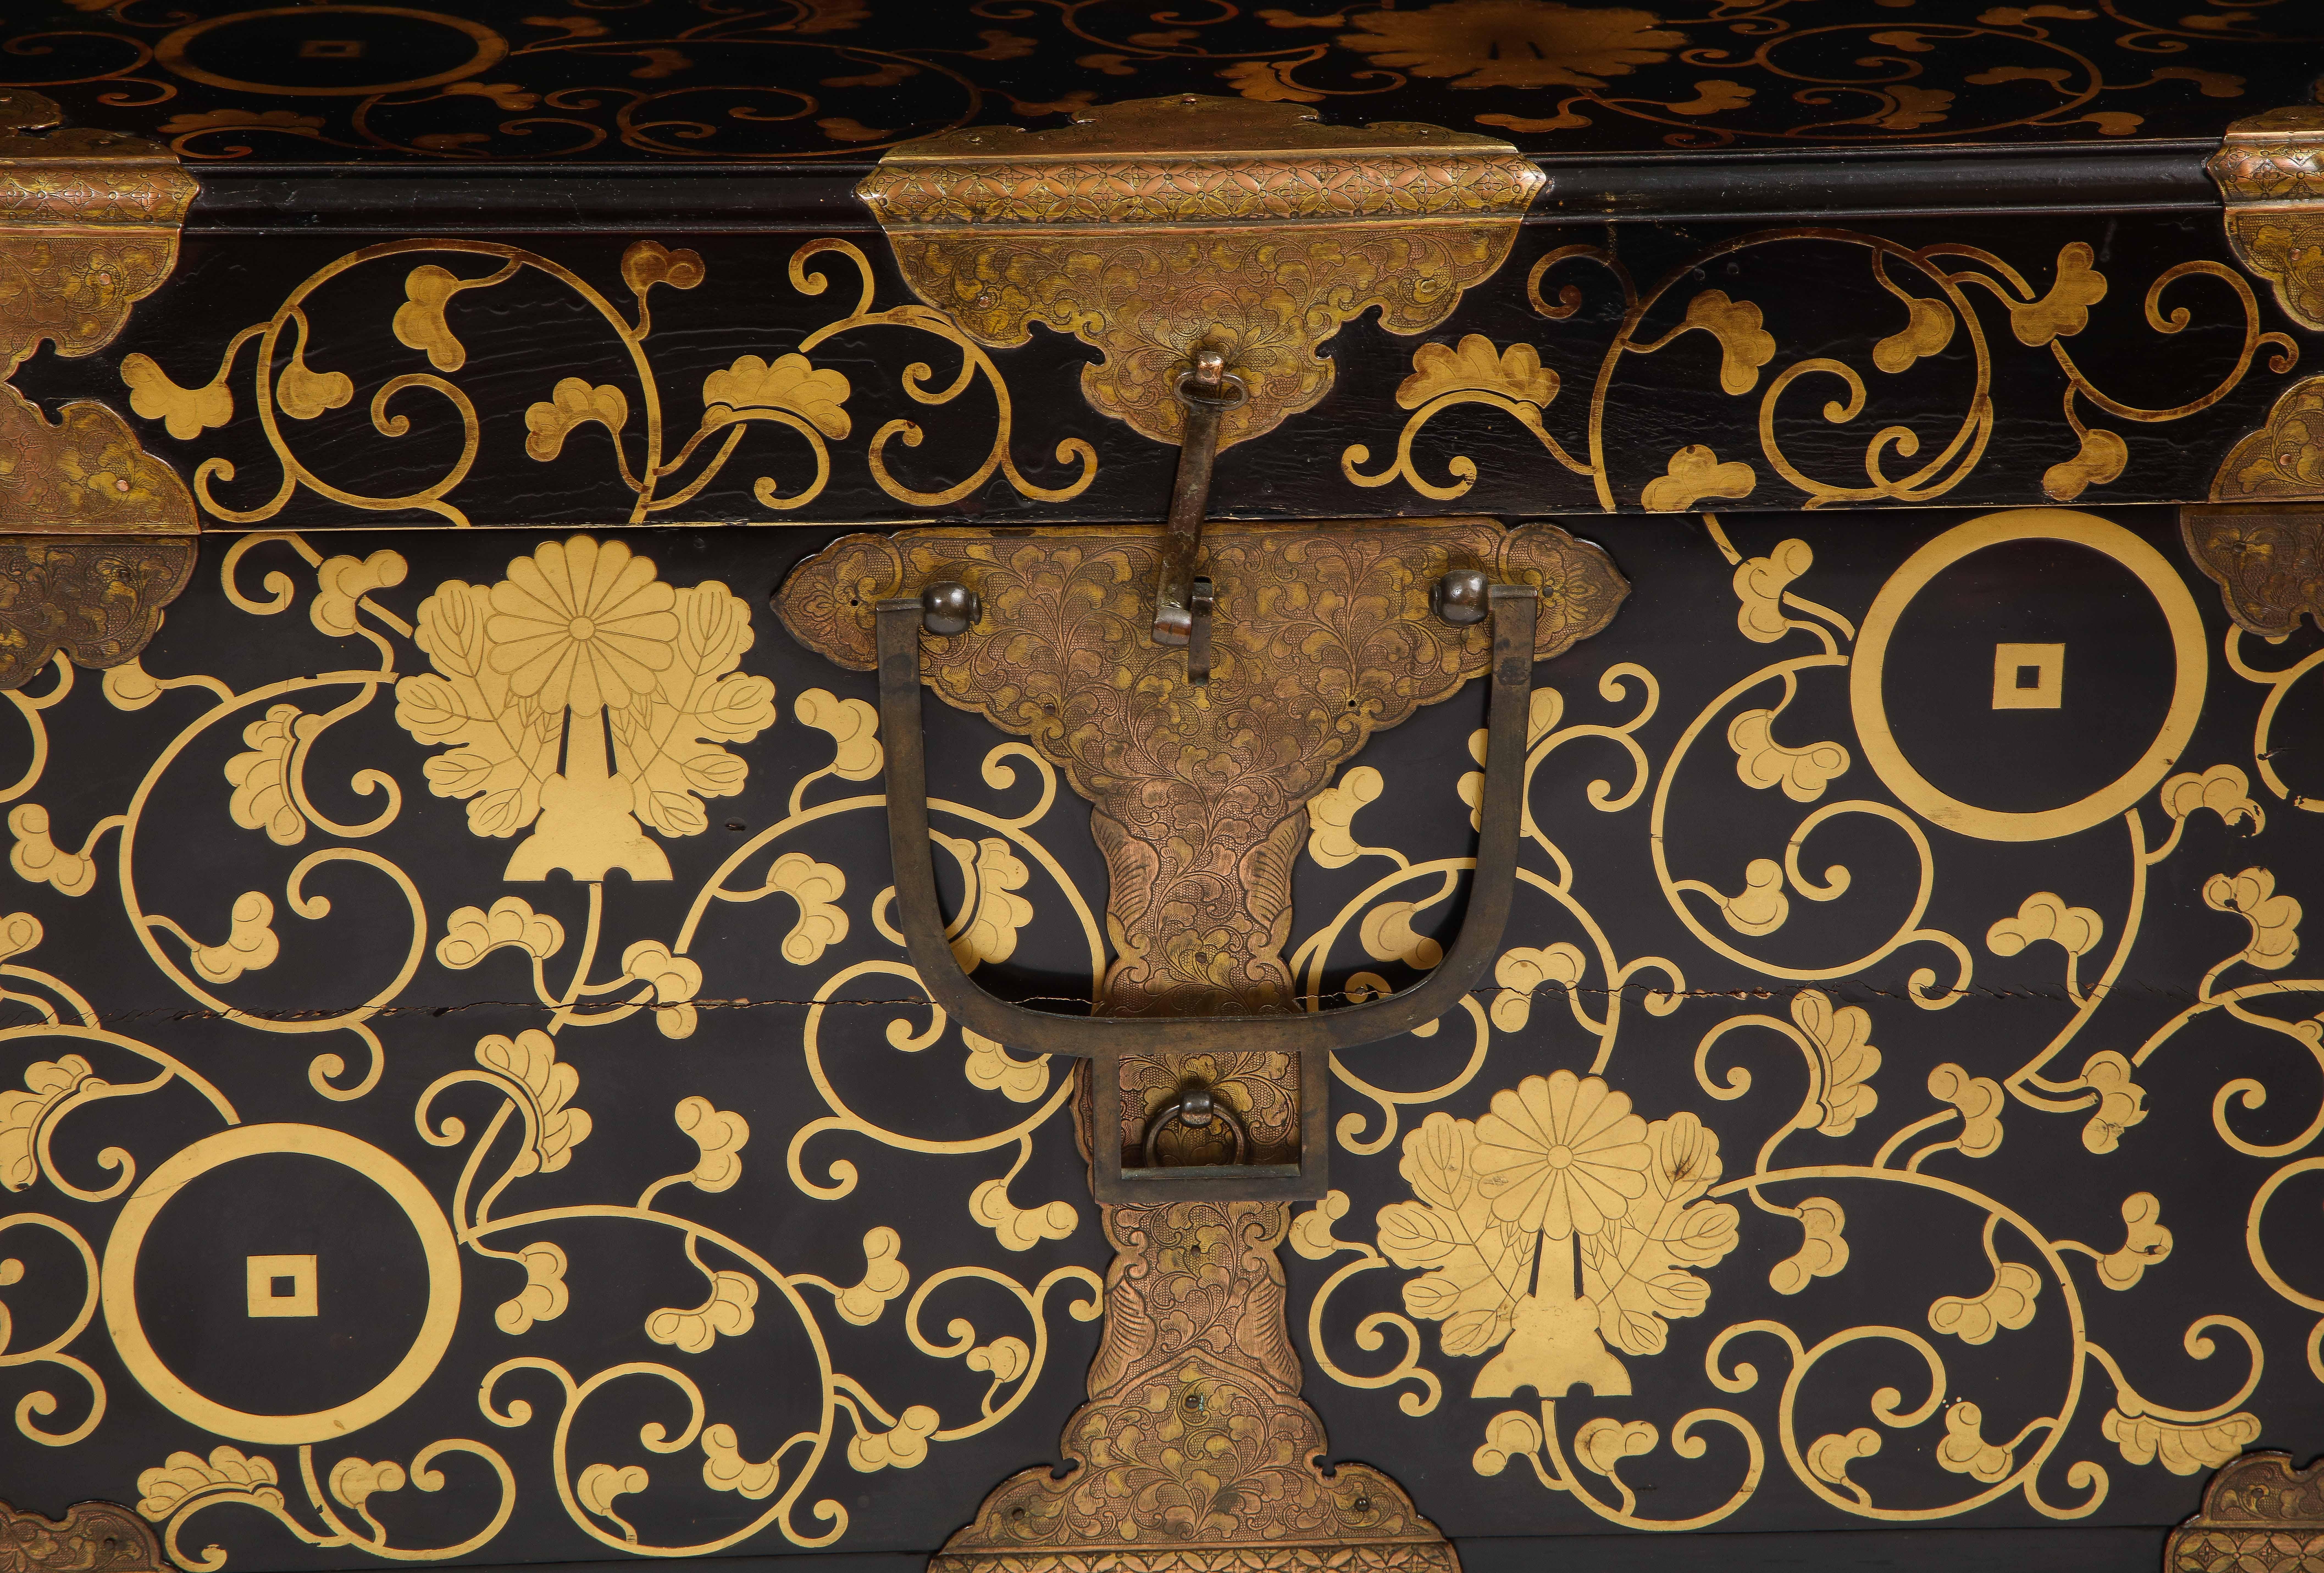  Pair of 19th Century Japanese Meiji Period Dore Bronze Mounted Lacquered Chests For Sale 2